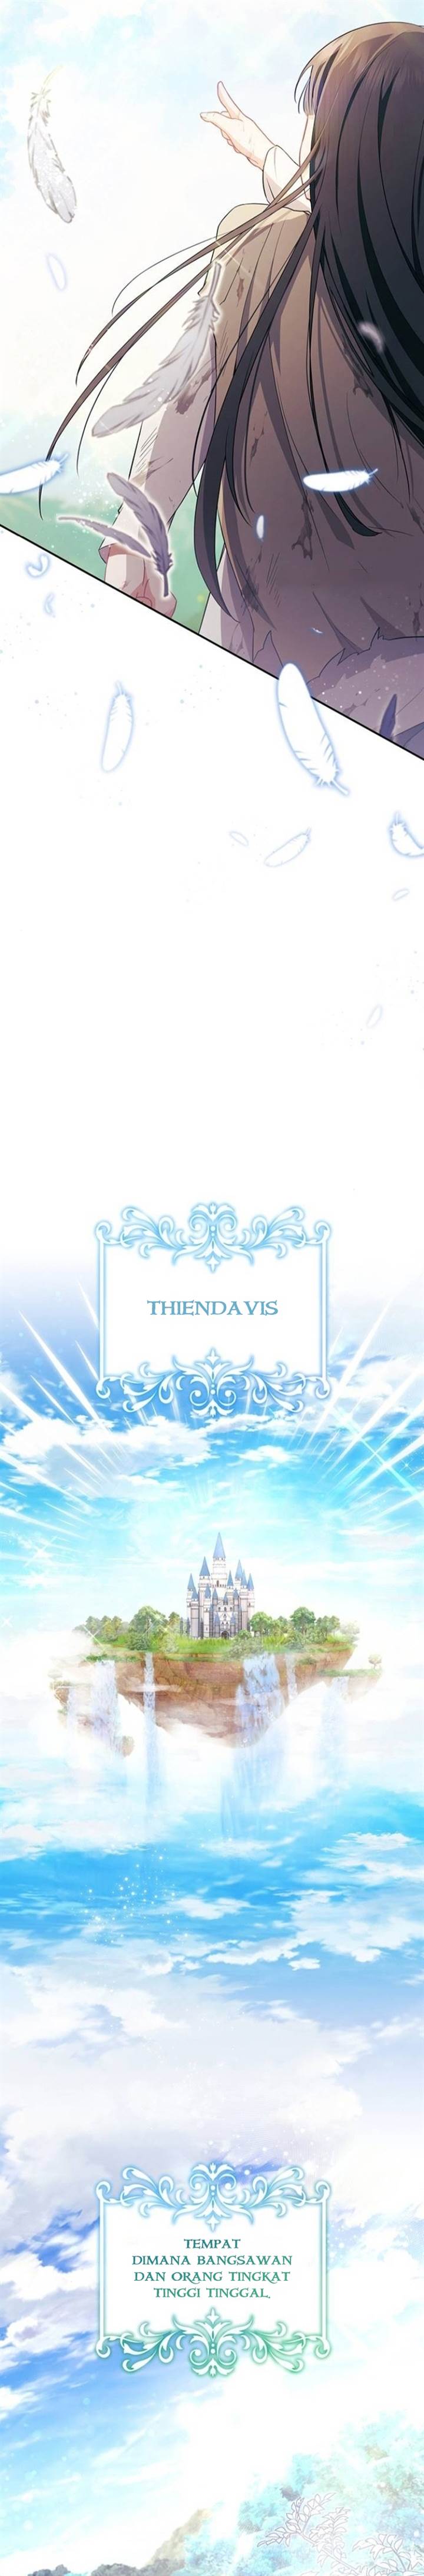 Thiendavis – For the Perfect Salvation Chapter 2